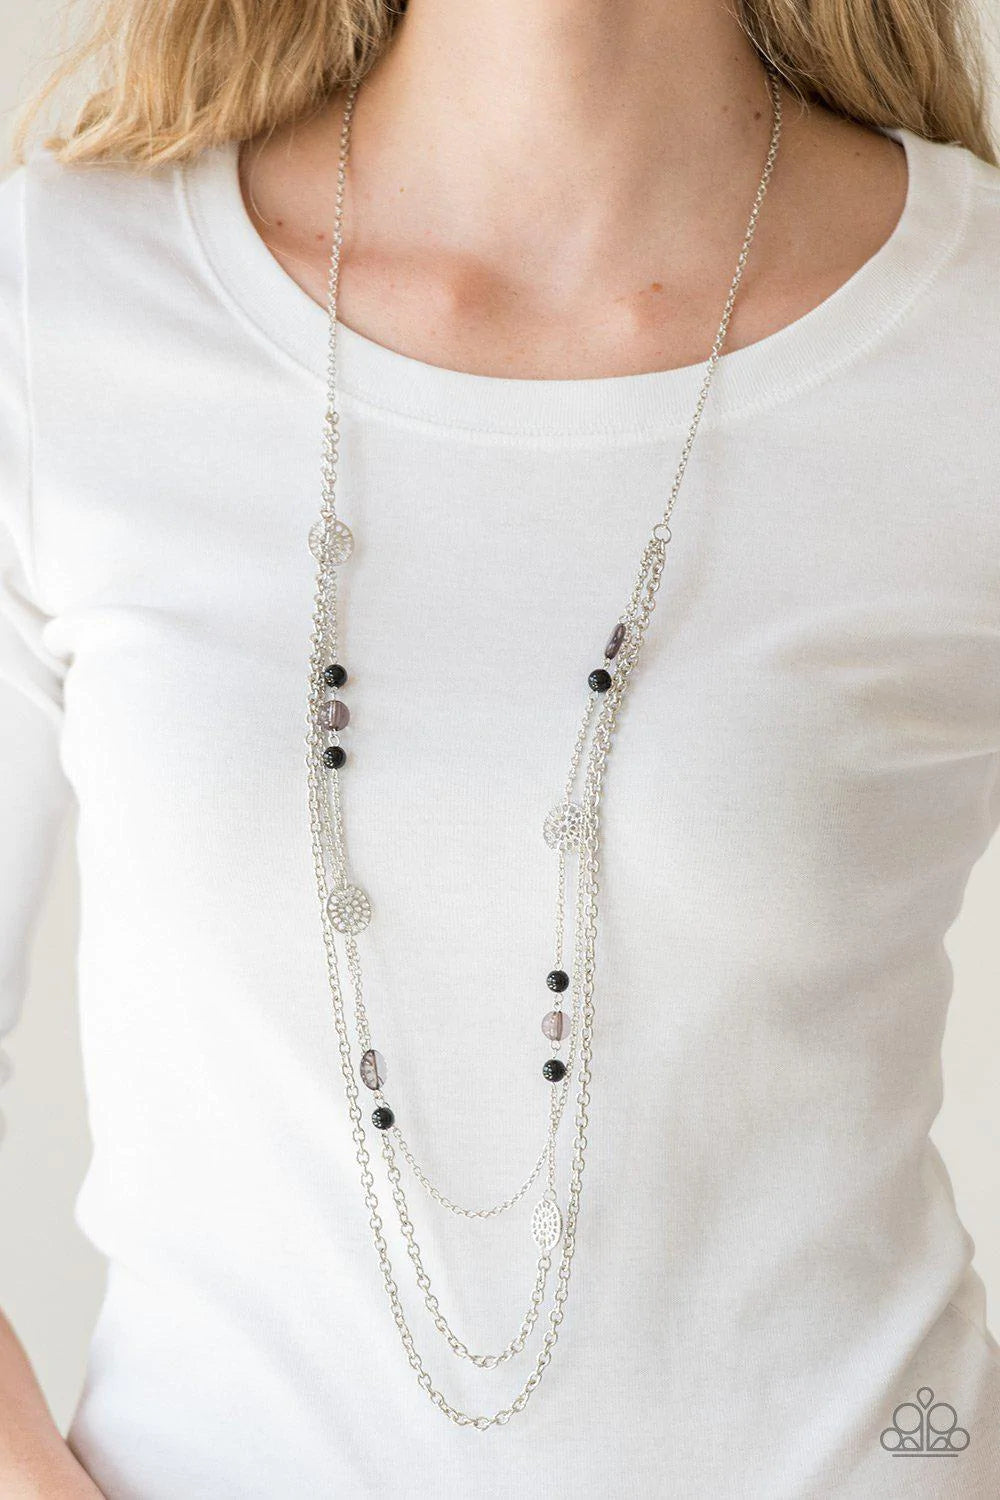 Paparazzi Accessories Pretty Pop-tastic! - Black Ornate silver accents, glassy beads, and polished black beads trickle along strands of shimmery silver chains for a whimsical look. Features an adjustable clasp closure. Sold as one individual necklace. Inc